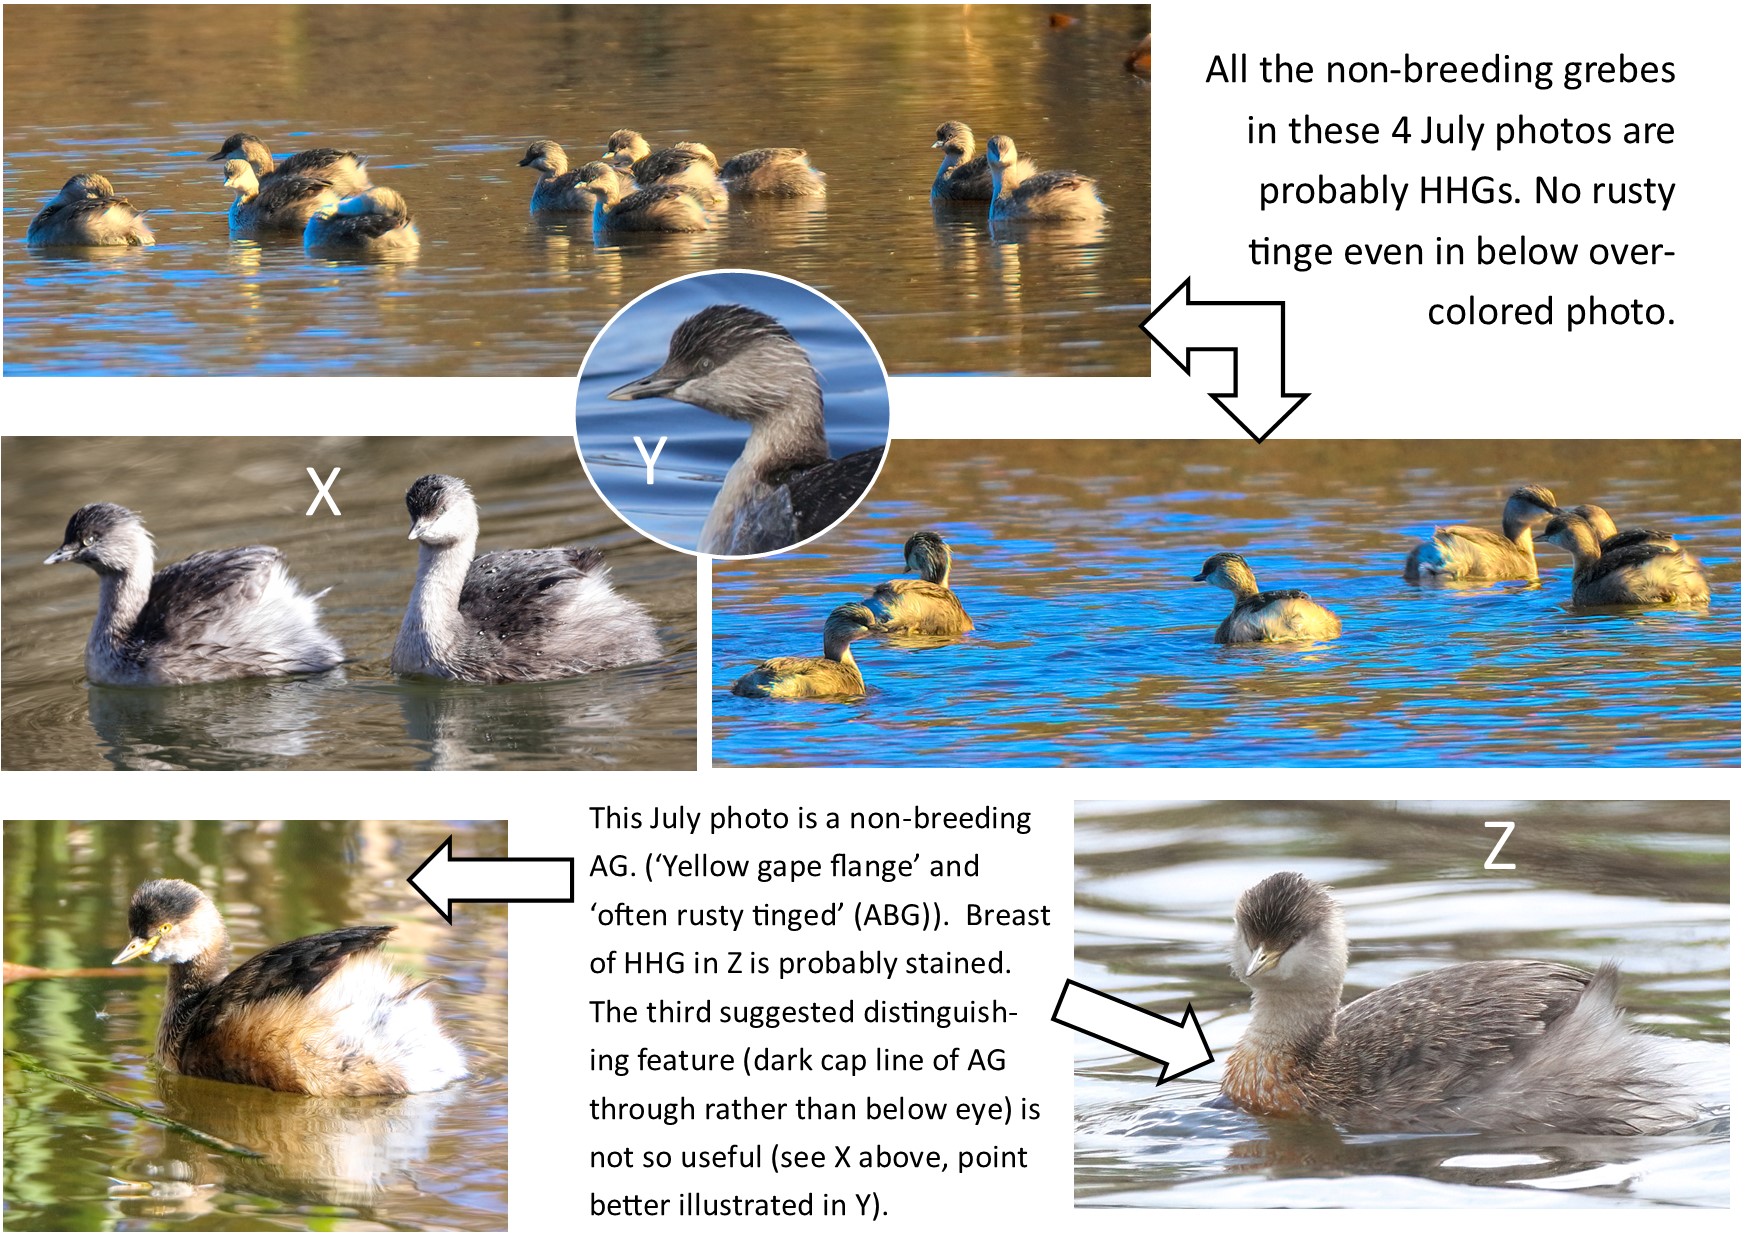 A collage of ducks swimming in water

Description automatically generated